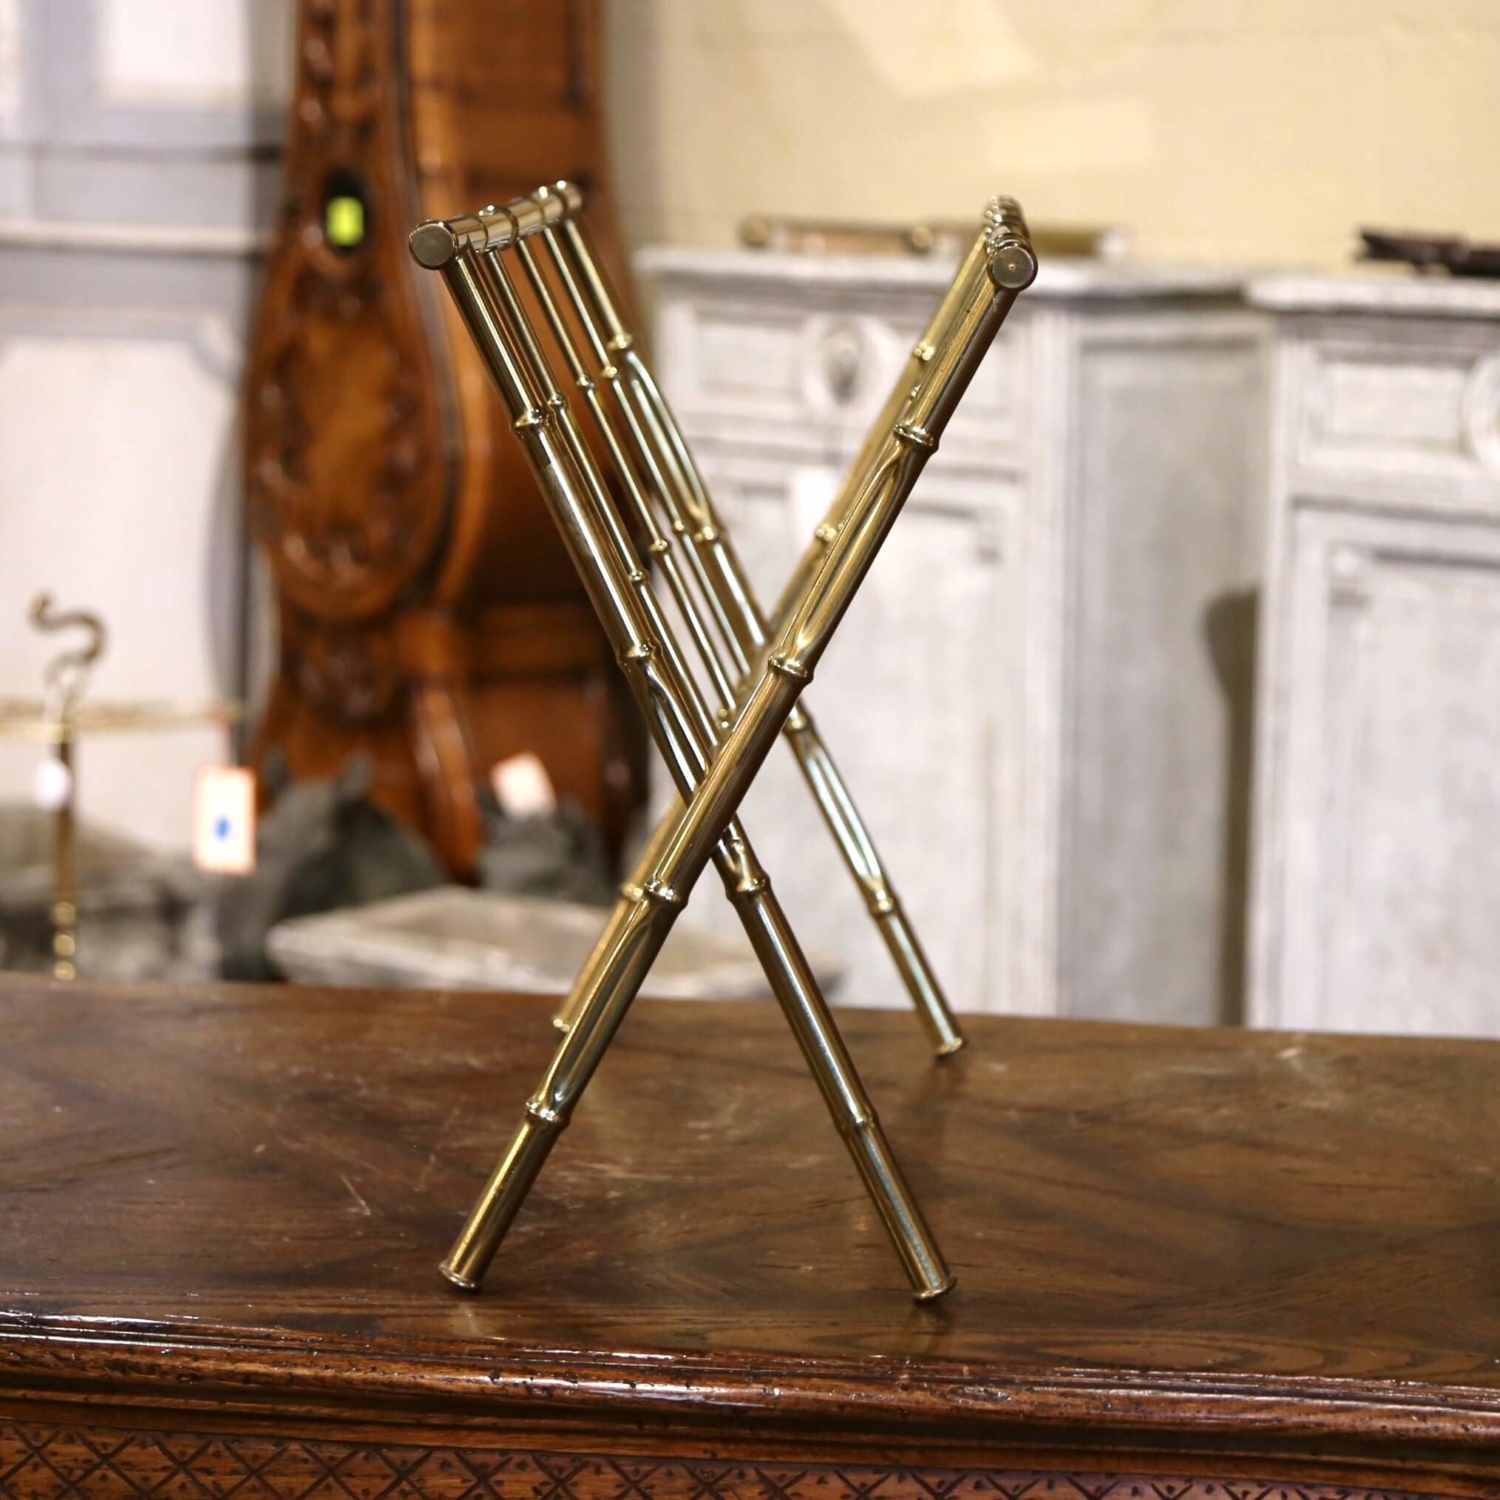 Mid-20th Century French Bamboo Brass Magazine Rack Maison Baguès Style -  Country French Interiors